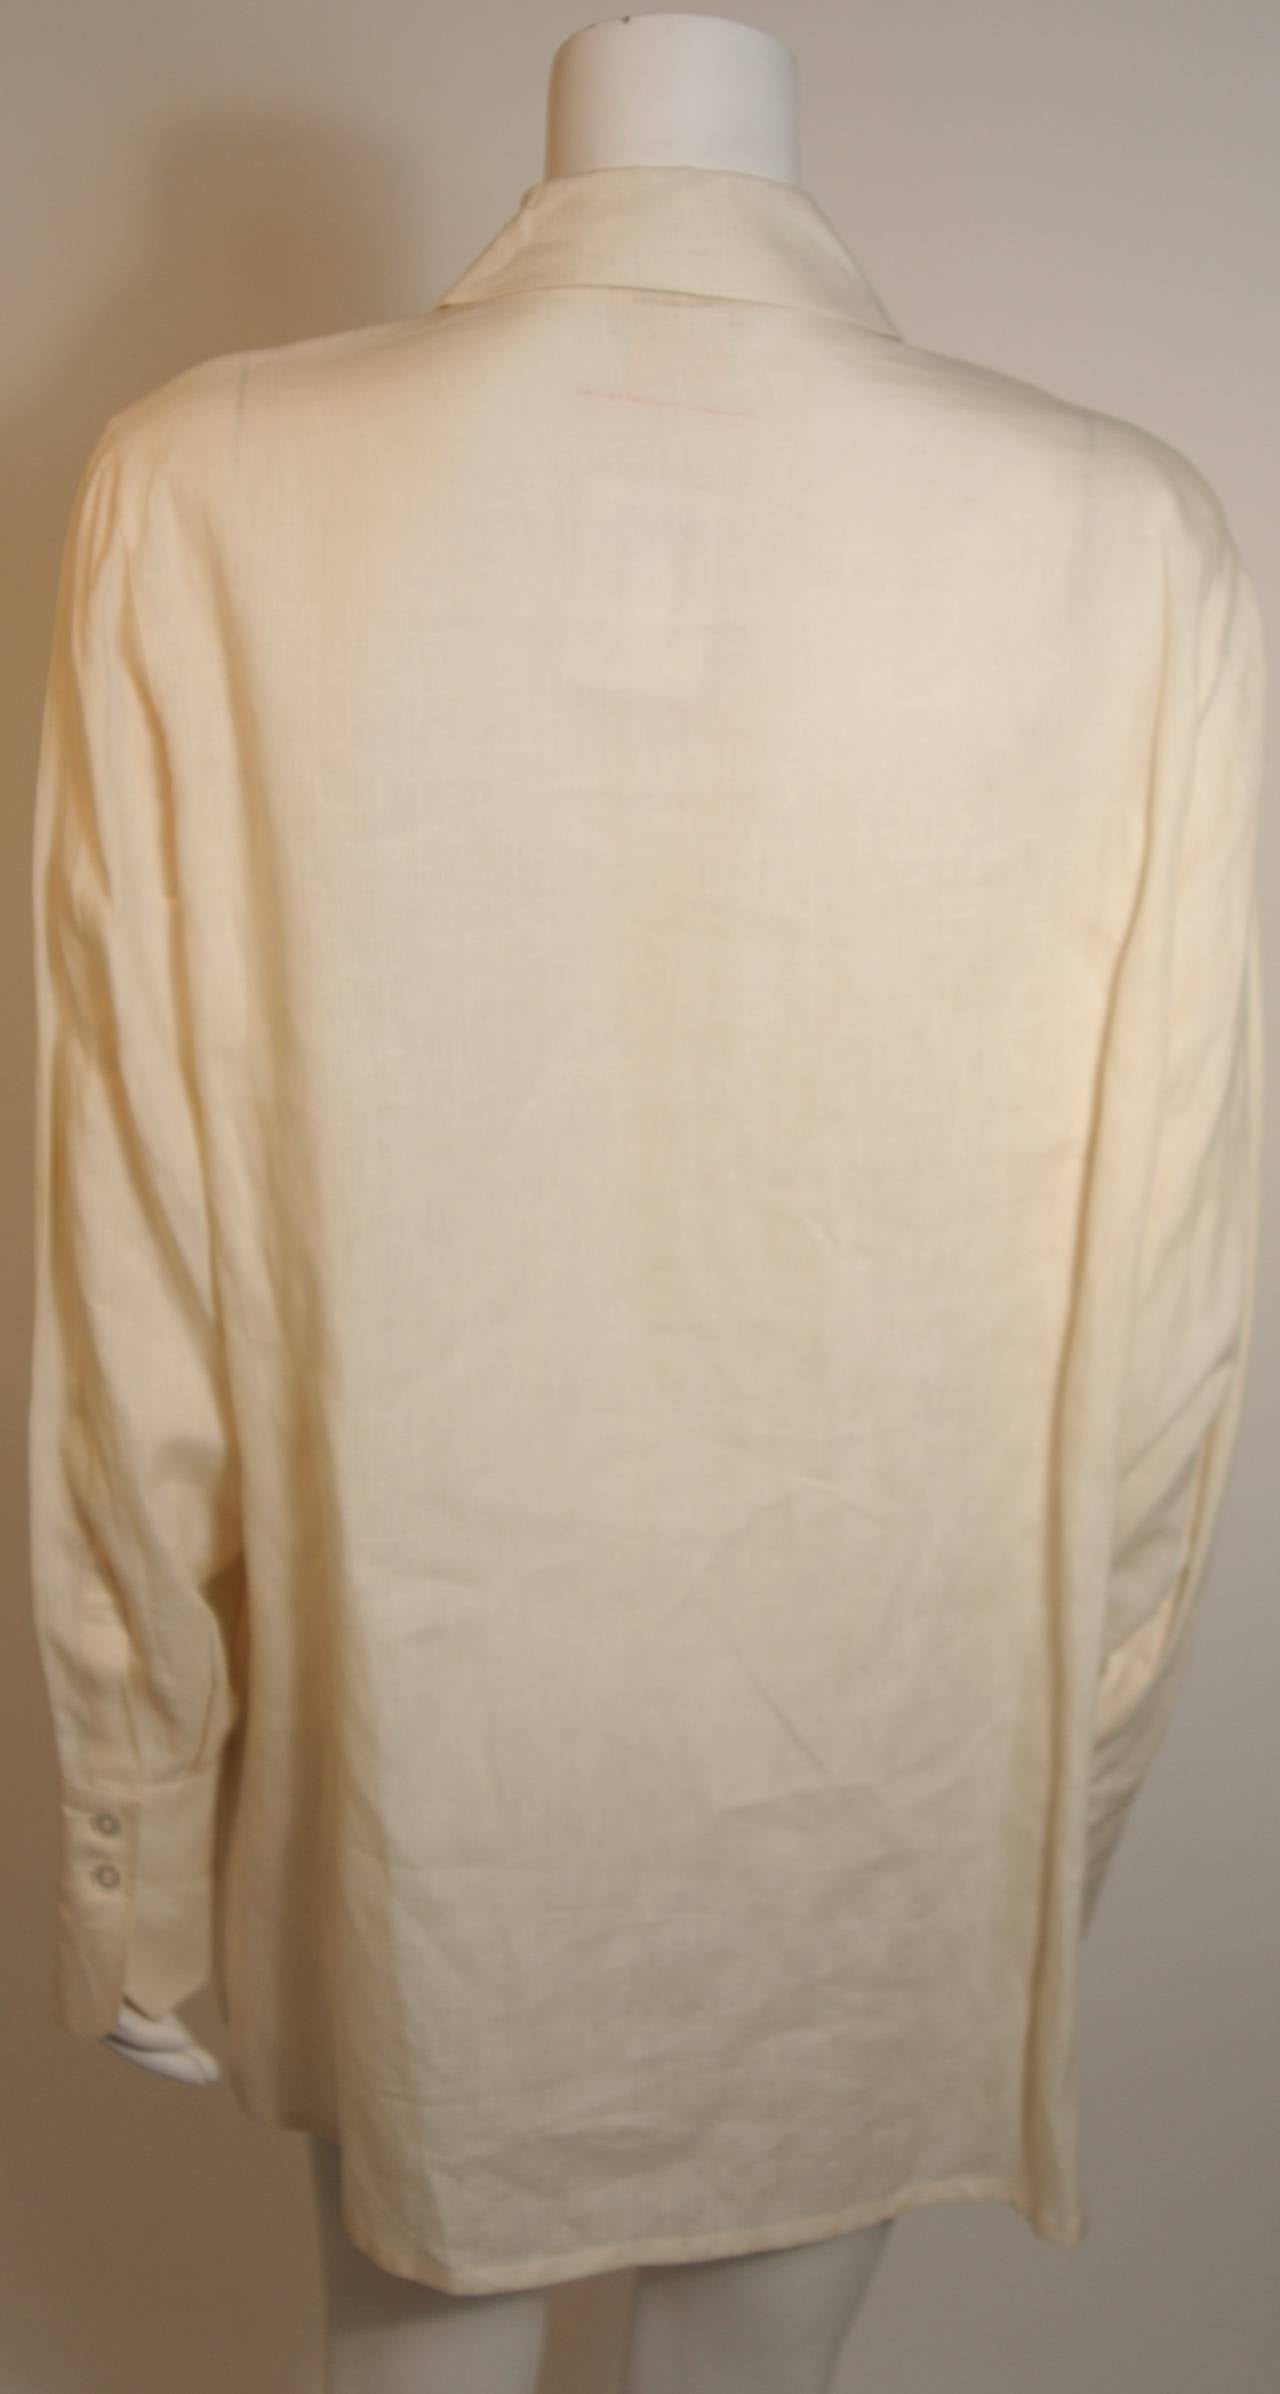 Hermes Linen Shirt with Original Tags Size 46 4